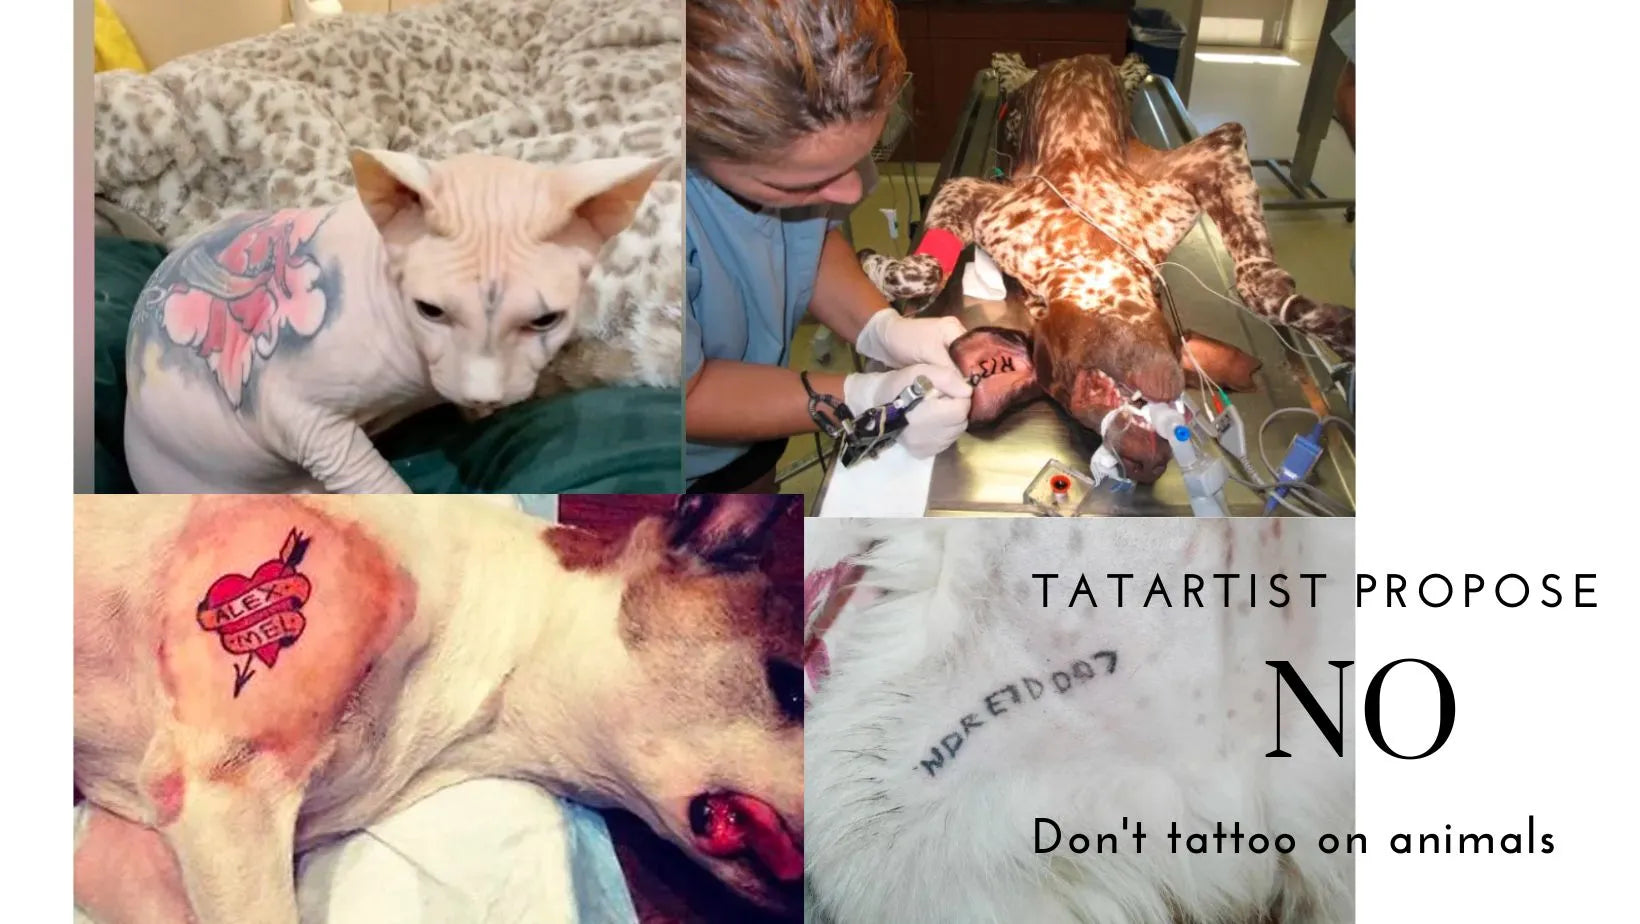 Why You Can't Tattoo and Pierce Animals